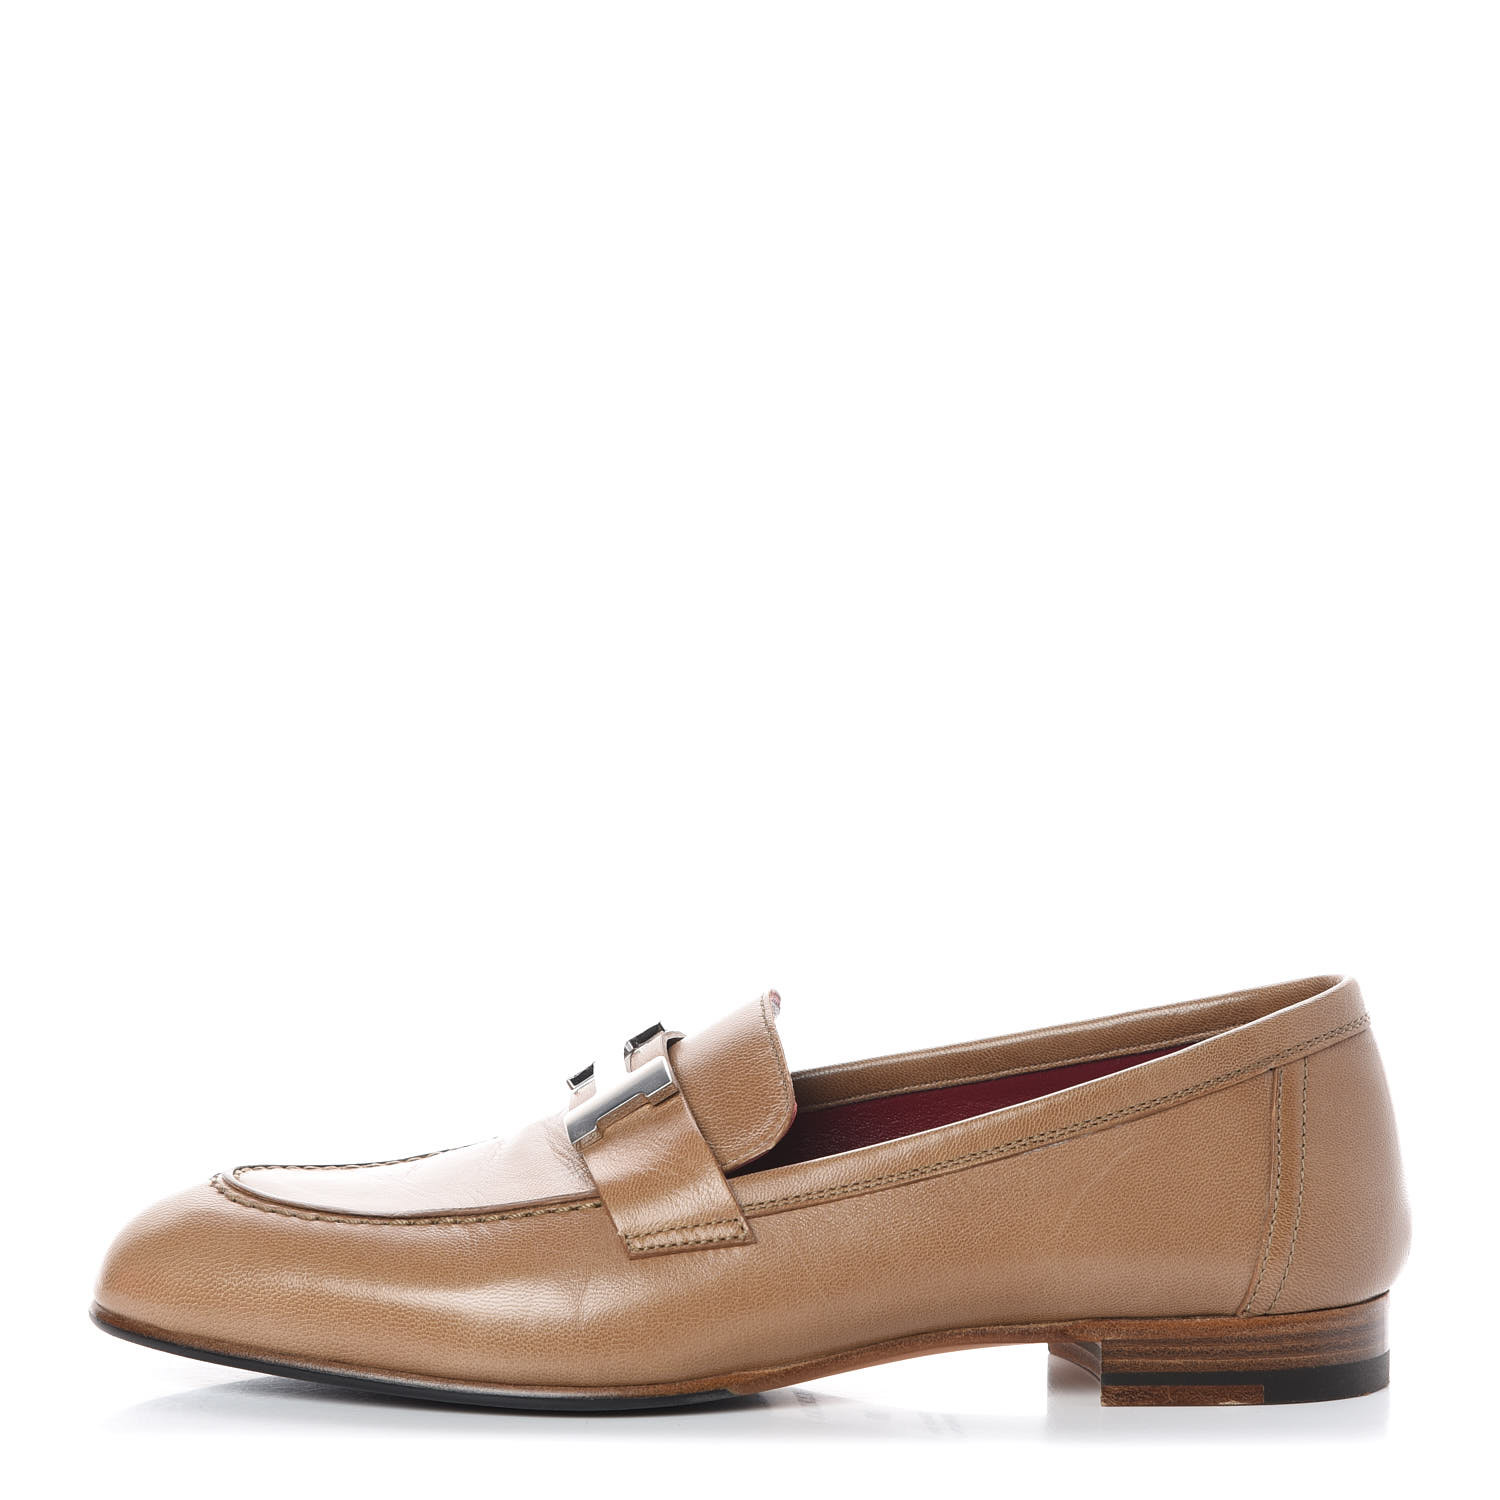 taupe loafers womens